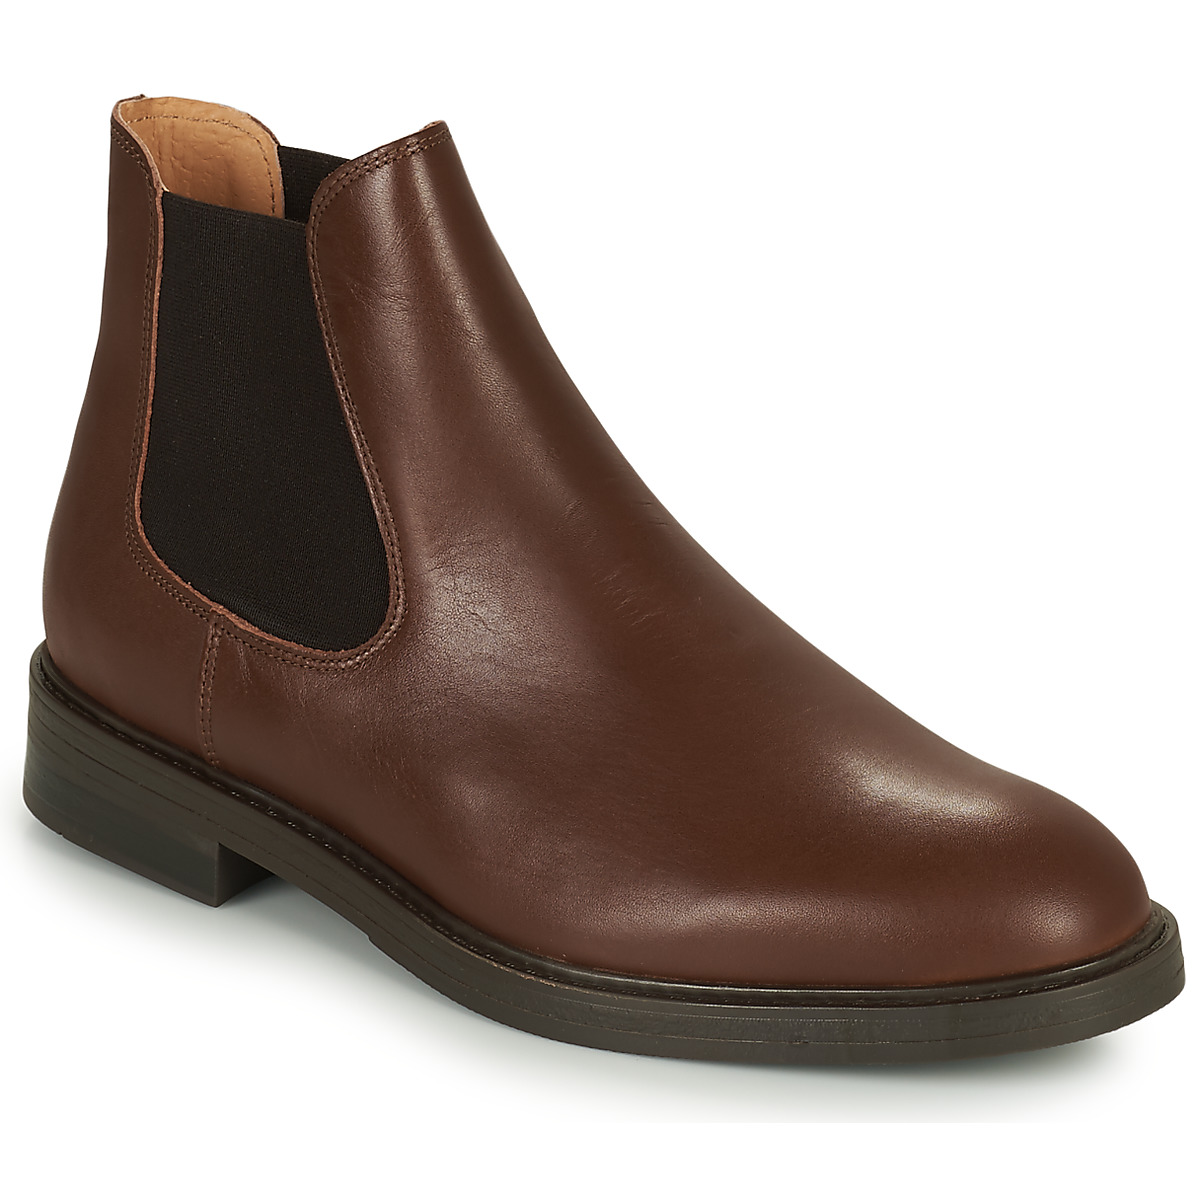 Selected Marron SLHBLAKE LEATHER CHELSEA BOOT UBMzQLfh